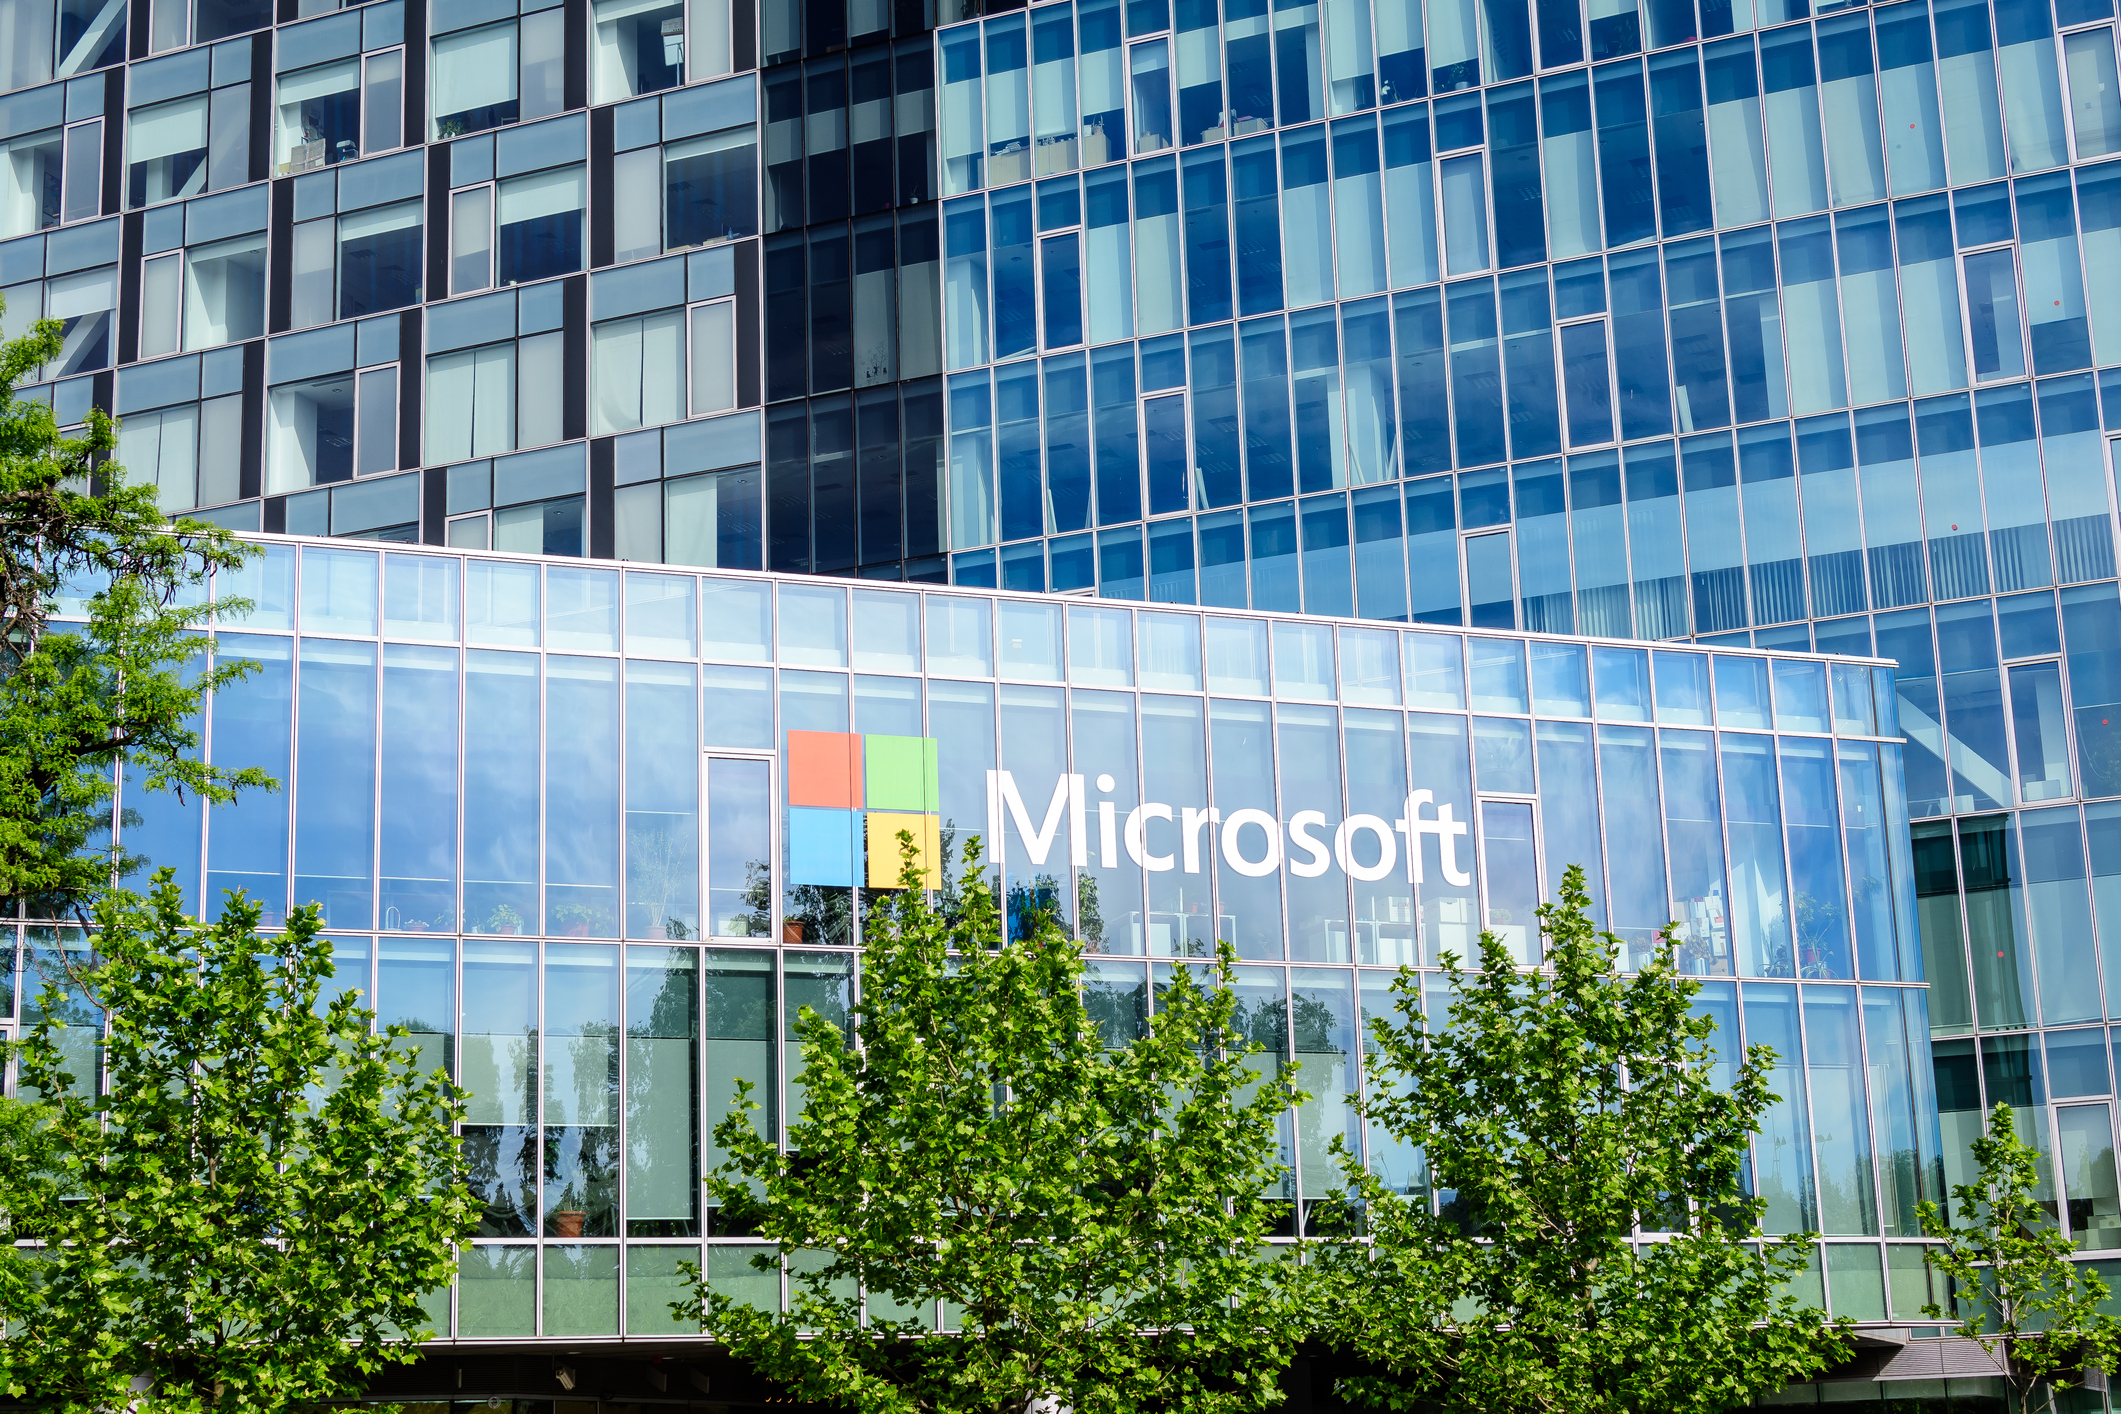 Microsoft aiming to hire over 400 people in Romania, cites the country’s economic potential